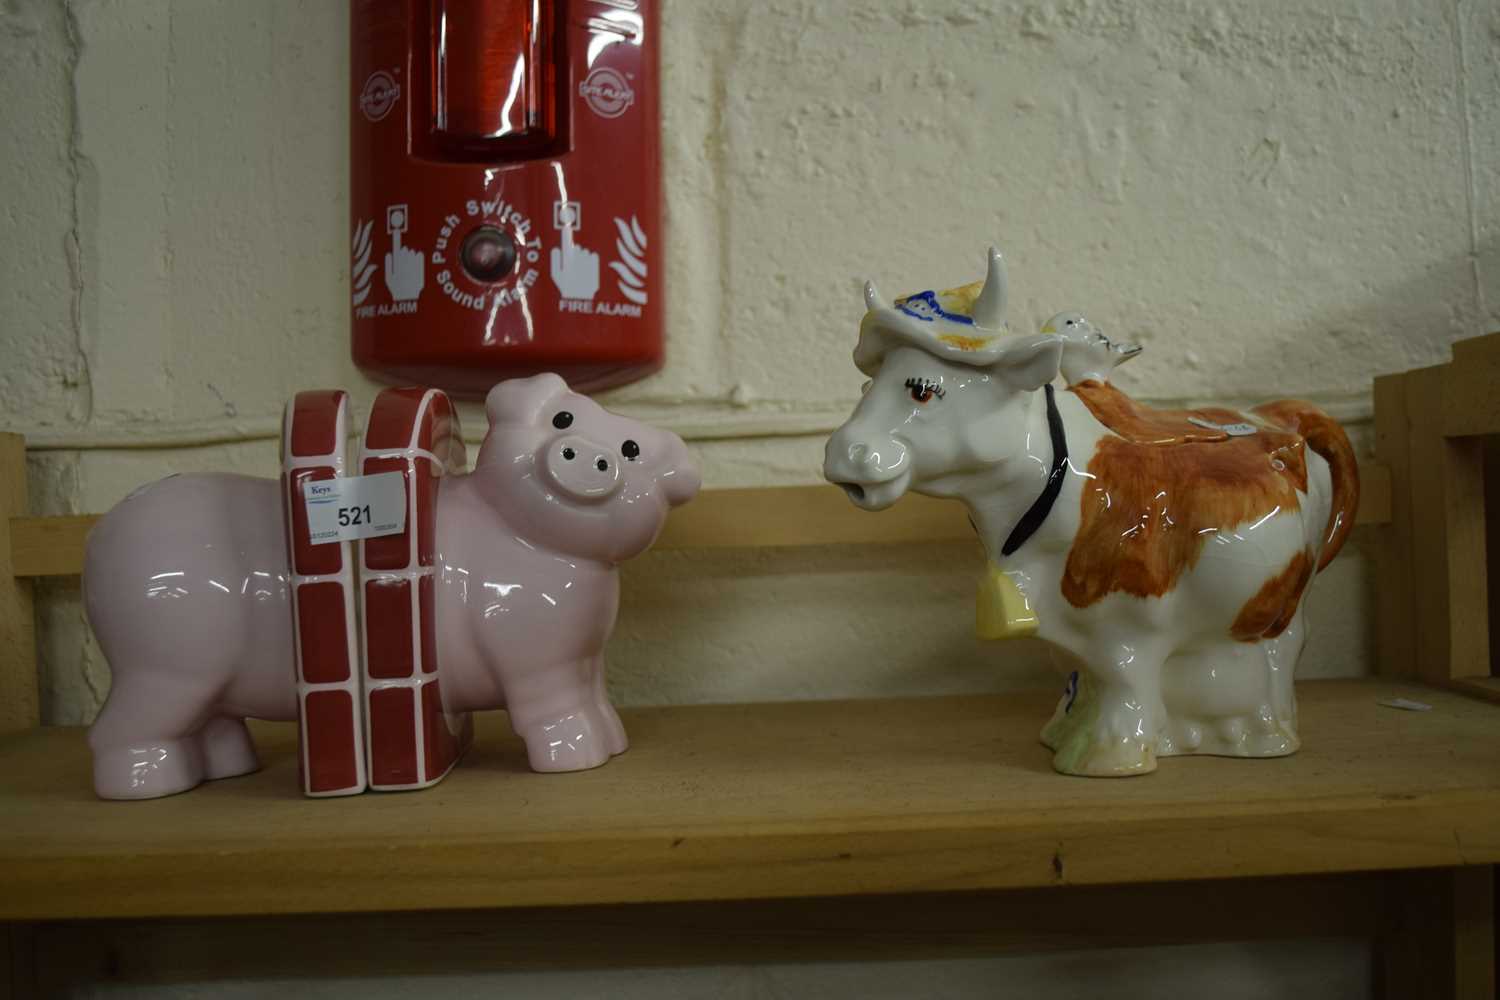 A novelty cow teapot and a pair of pig book ends